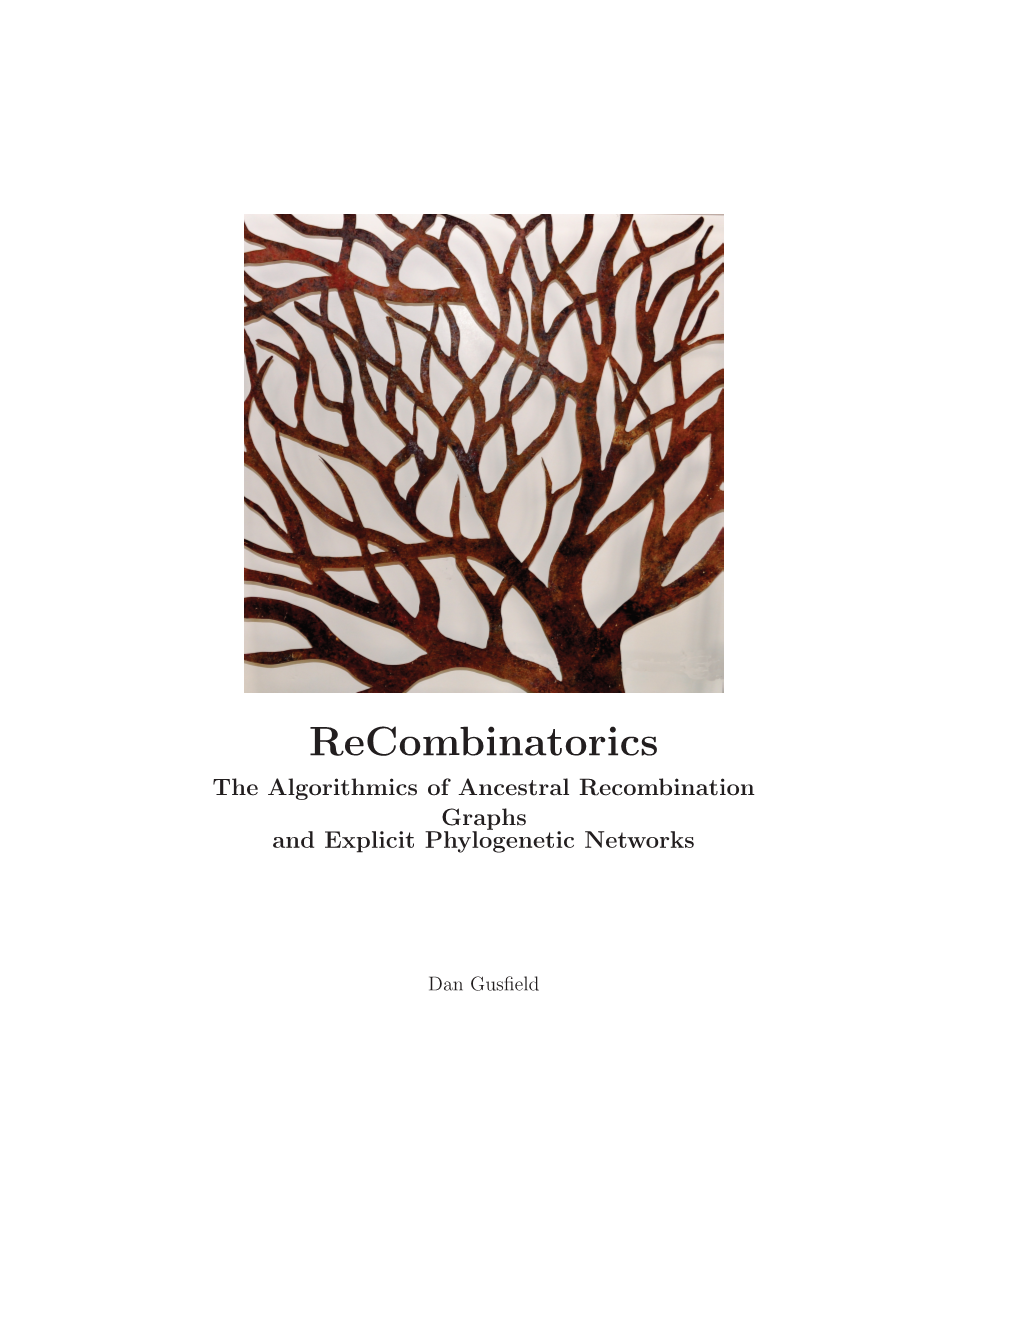 Recombinatorics the Algorithmics of Ancestral Recombination Graphs and Explicit Phylogenetic Networks